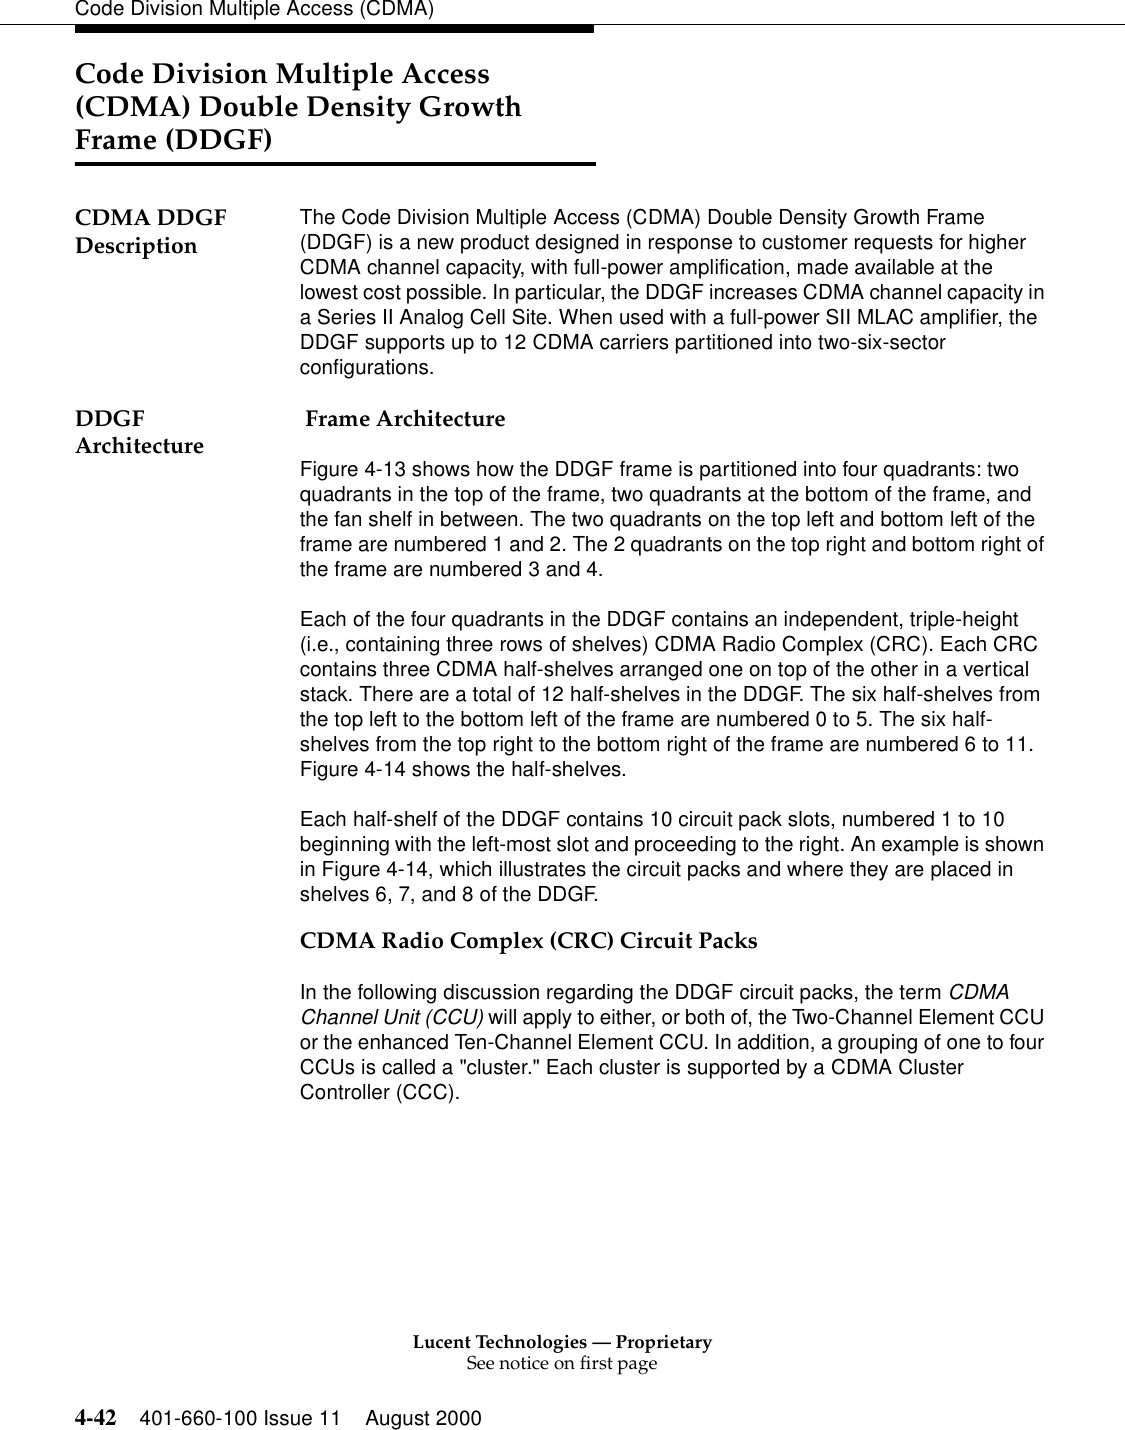 Lucent Technologies — ProprietarySee notice on first page4-42 401-660-100 Issue 11 August 2000Code Division Multiple Access (CDMA)Code Division Multiple Access (CDMA) Double Density Growth Frame (DDGF)CDMA DDGF Description The Code Division Multiple Access (CDMA) Double Density Growth Frame (DDGF) is a new product designed in response to customer requests for higher CDMA channel capacity, with full-power amplification, made available at the lowest cost possible. In particular, the DDGF increases CDMA channel capacity in a Series II Analog Cell Site. When used with a full-power SII MLAC amplifier, the DDGF supports up to 12 CDMA carriers partitioned into two-six-sector configurations. DDGF Architecture  Frame ArchitectureFigure 4-13 shows how the DDGF frame is partitioned into four quadrants: two quadrants in the top of the frame, two quadrants at the bottom of the frame, and the fan shelf in between. The two quadrants on the top left and bottom left of the frame are numbered 1 and 2. The 2 quadrants on the top right and bottom right of the frame are numbered 3 and 4.Each of the four quadrants in the DDGF contains an independent, triple-height (i.e., containing three rows of shelves) CDMA Radio Complex (CRC). Each CRC contains three CDMA half-shelves arranged one on top of the other in a vertical stack. There are a total of 12 half-shelves in the DDGF. The six half-shelves from the top left to the bottom left of the frame are numbered 0 to 5. The six half-shelves from the top right to the bottom right of the frame are numbered 6 to 11. Figure 4-14 shows the half-shelves.Each half-shelf of the DDGF contains 10 circuit pack slots, numbered 1 to 10 beginning with the left-most slot and proceeding to the right. An example is shown in Figure 4-14, which illustrates the circuit packs and where they are placed in shelves 6, 7, and 8 of the DDGF.CDMA Radio Complex (CRC) Circuit PacksIn the following discussion regarding the DDGF circuit packs, the term CDMA Channel Unit (CCU) will apply to either, or both of, the Two-Channel Element CCU or the enhanced Ten-Channel Element CCU. In addition, a grouping of one to four CCUs is called a &quot;cluster.&quot; Each cluster is supported by a CDMA Cluster Controller (CCC).